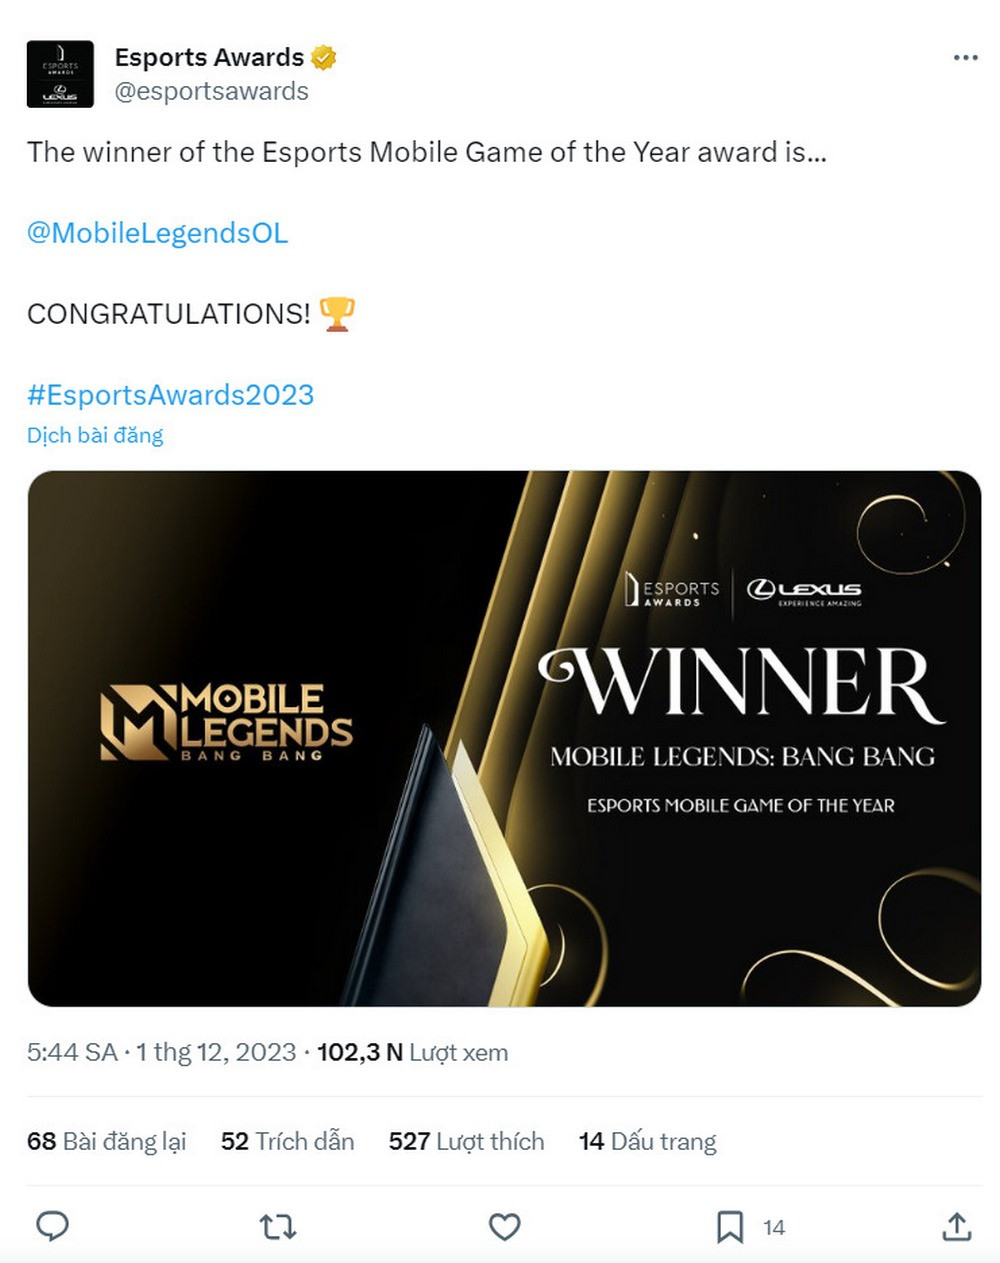 Mobile Legends bất ngờ giành giải The Esports Mobile Game of the Year